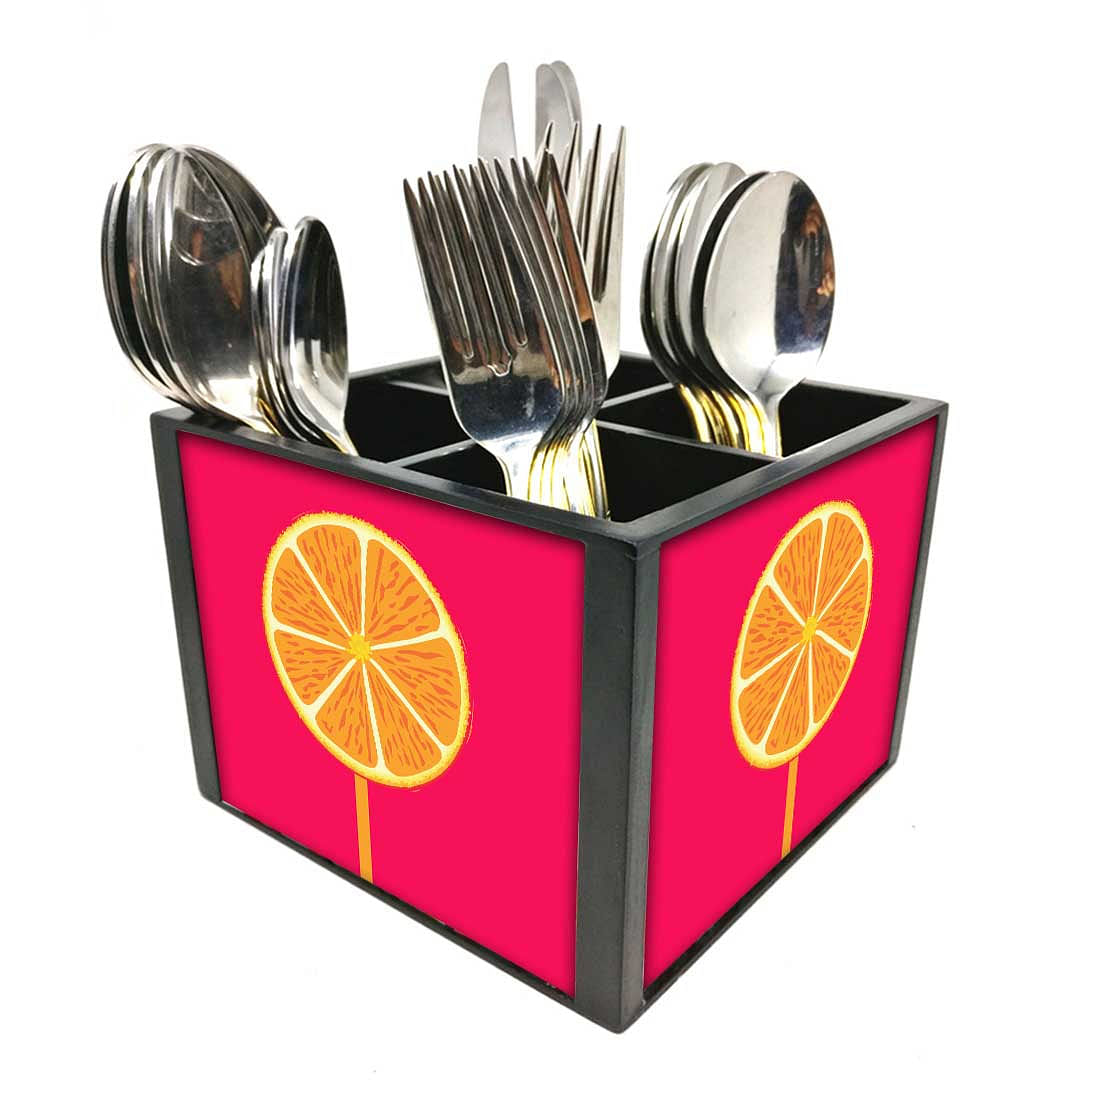 Sweet lime Pink Cutlery Holder Stand Silverware Caddy Organizer for Spoons, Forks & Knives-Made of Pinewood Nutcase